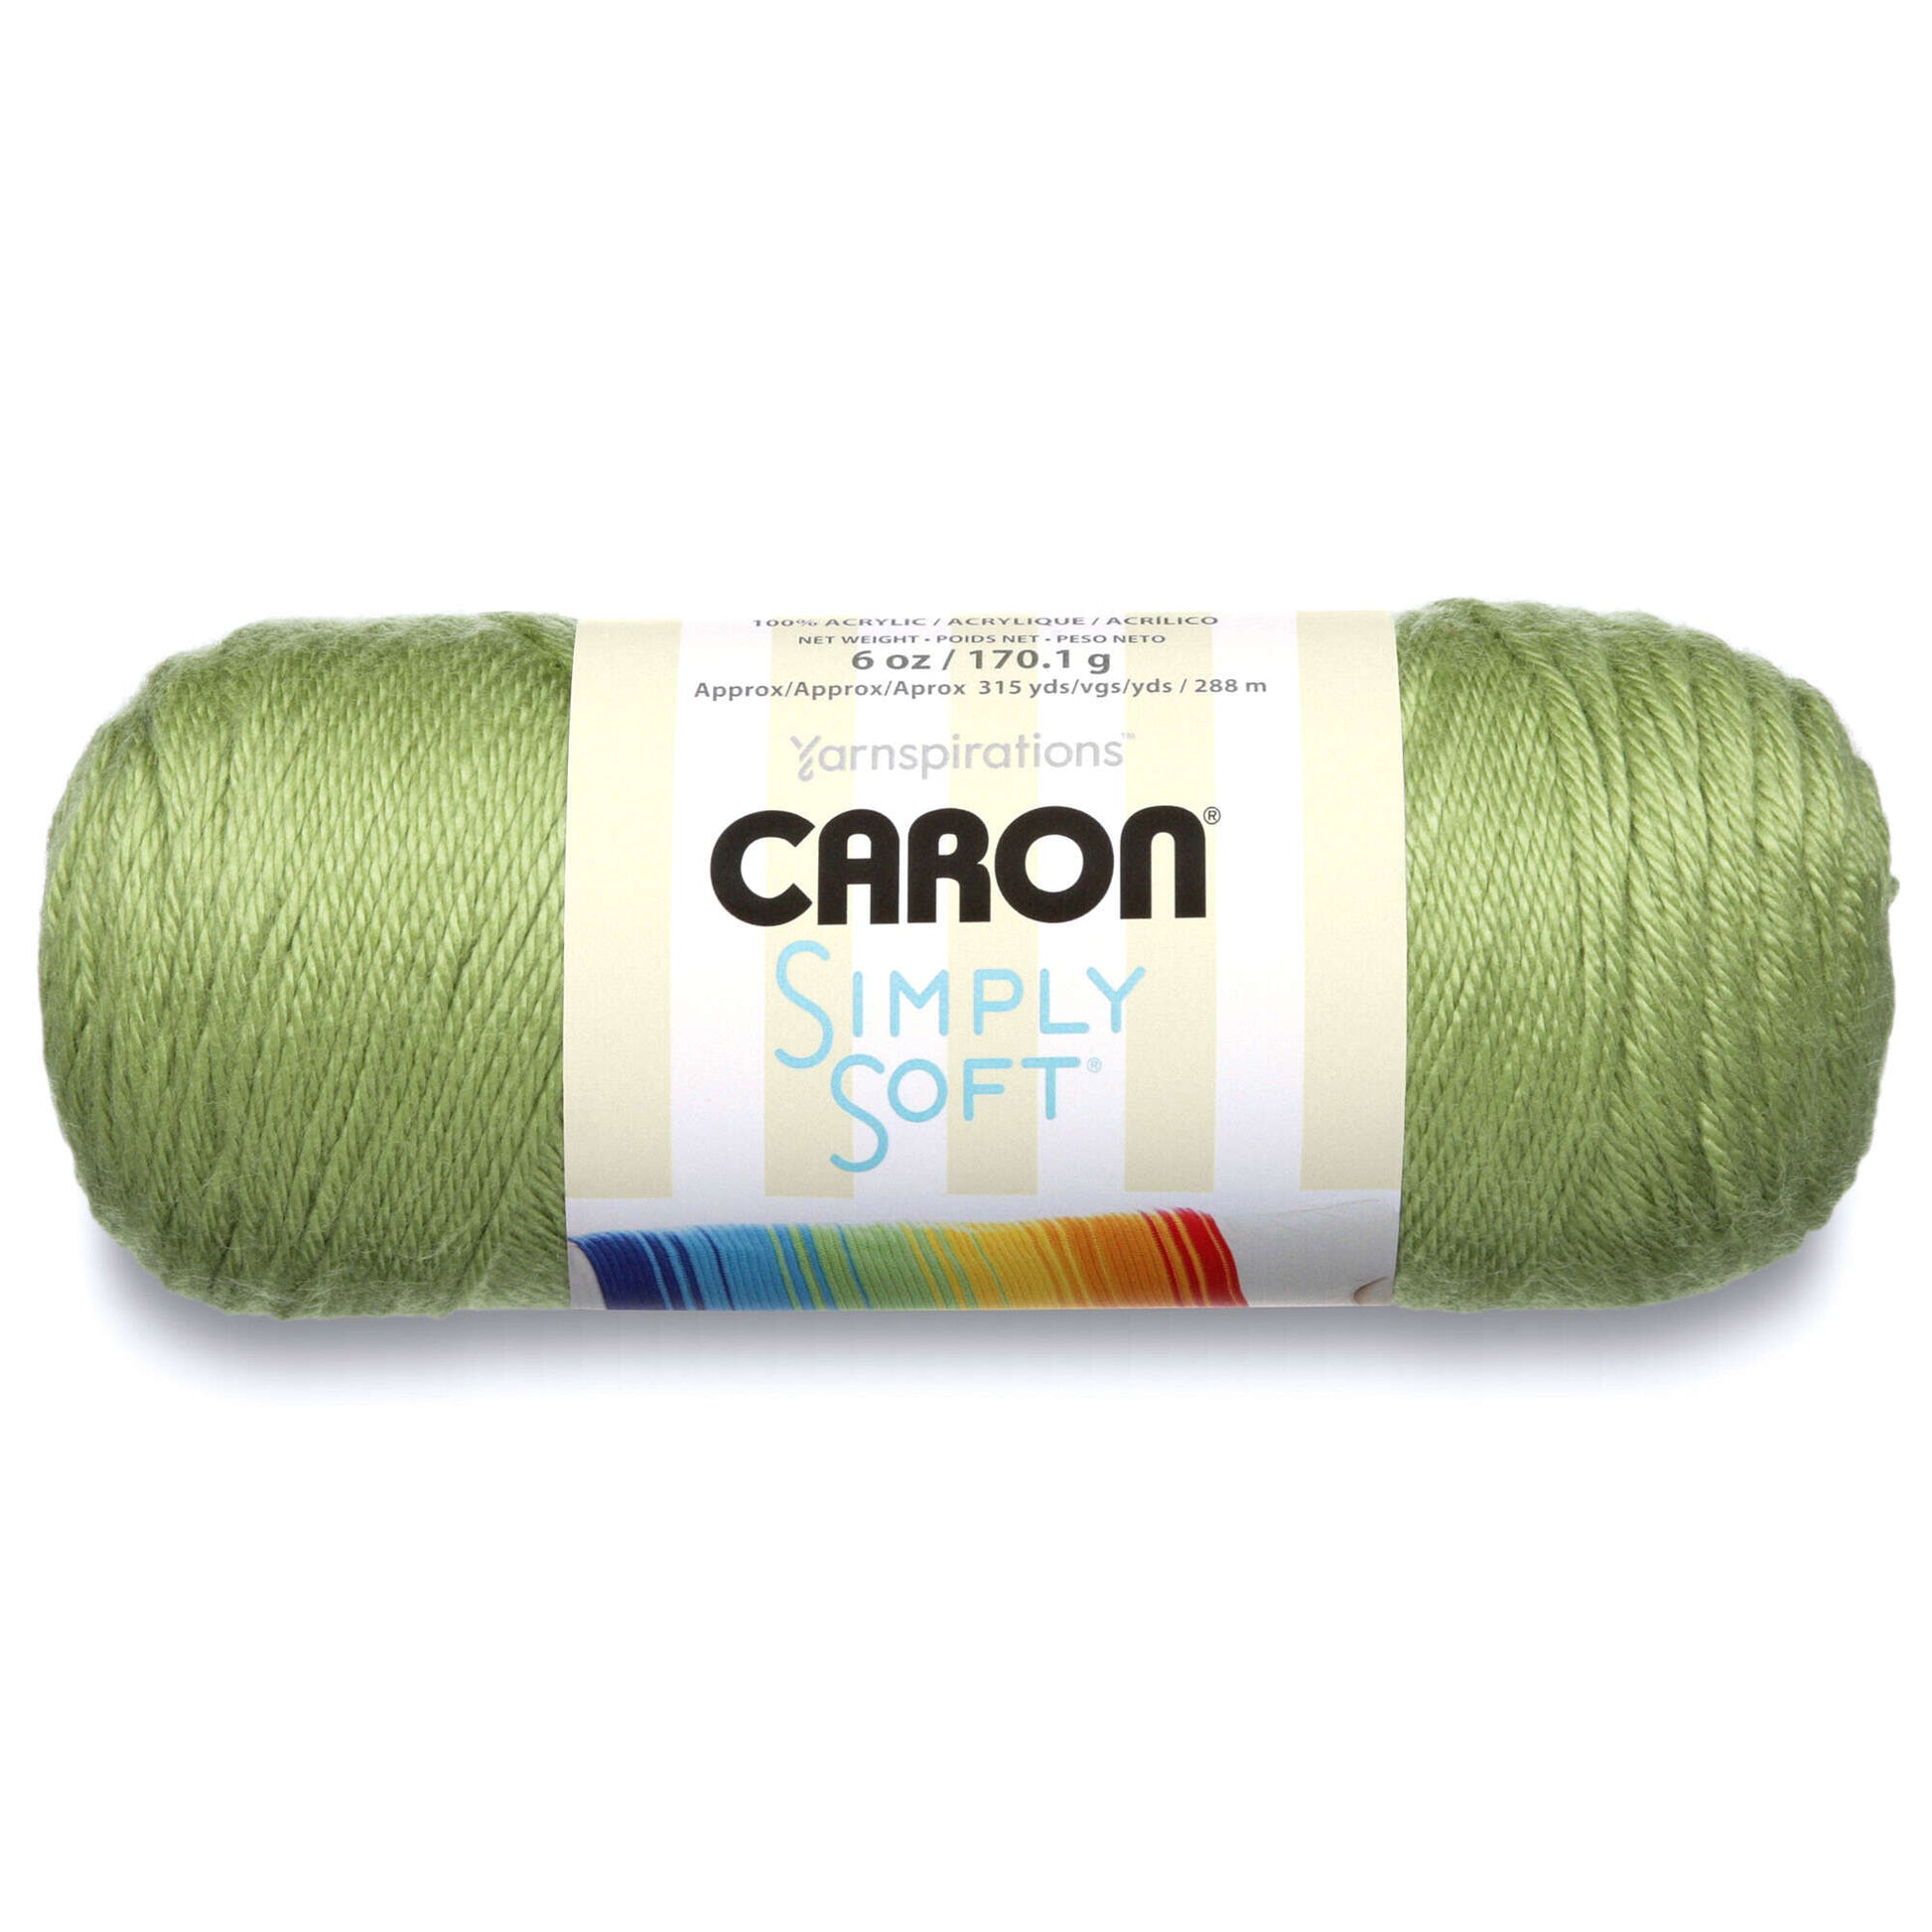 Hobby Lobby's I Love This Yarn (ILTY): a Comprehensive Review